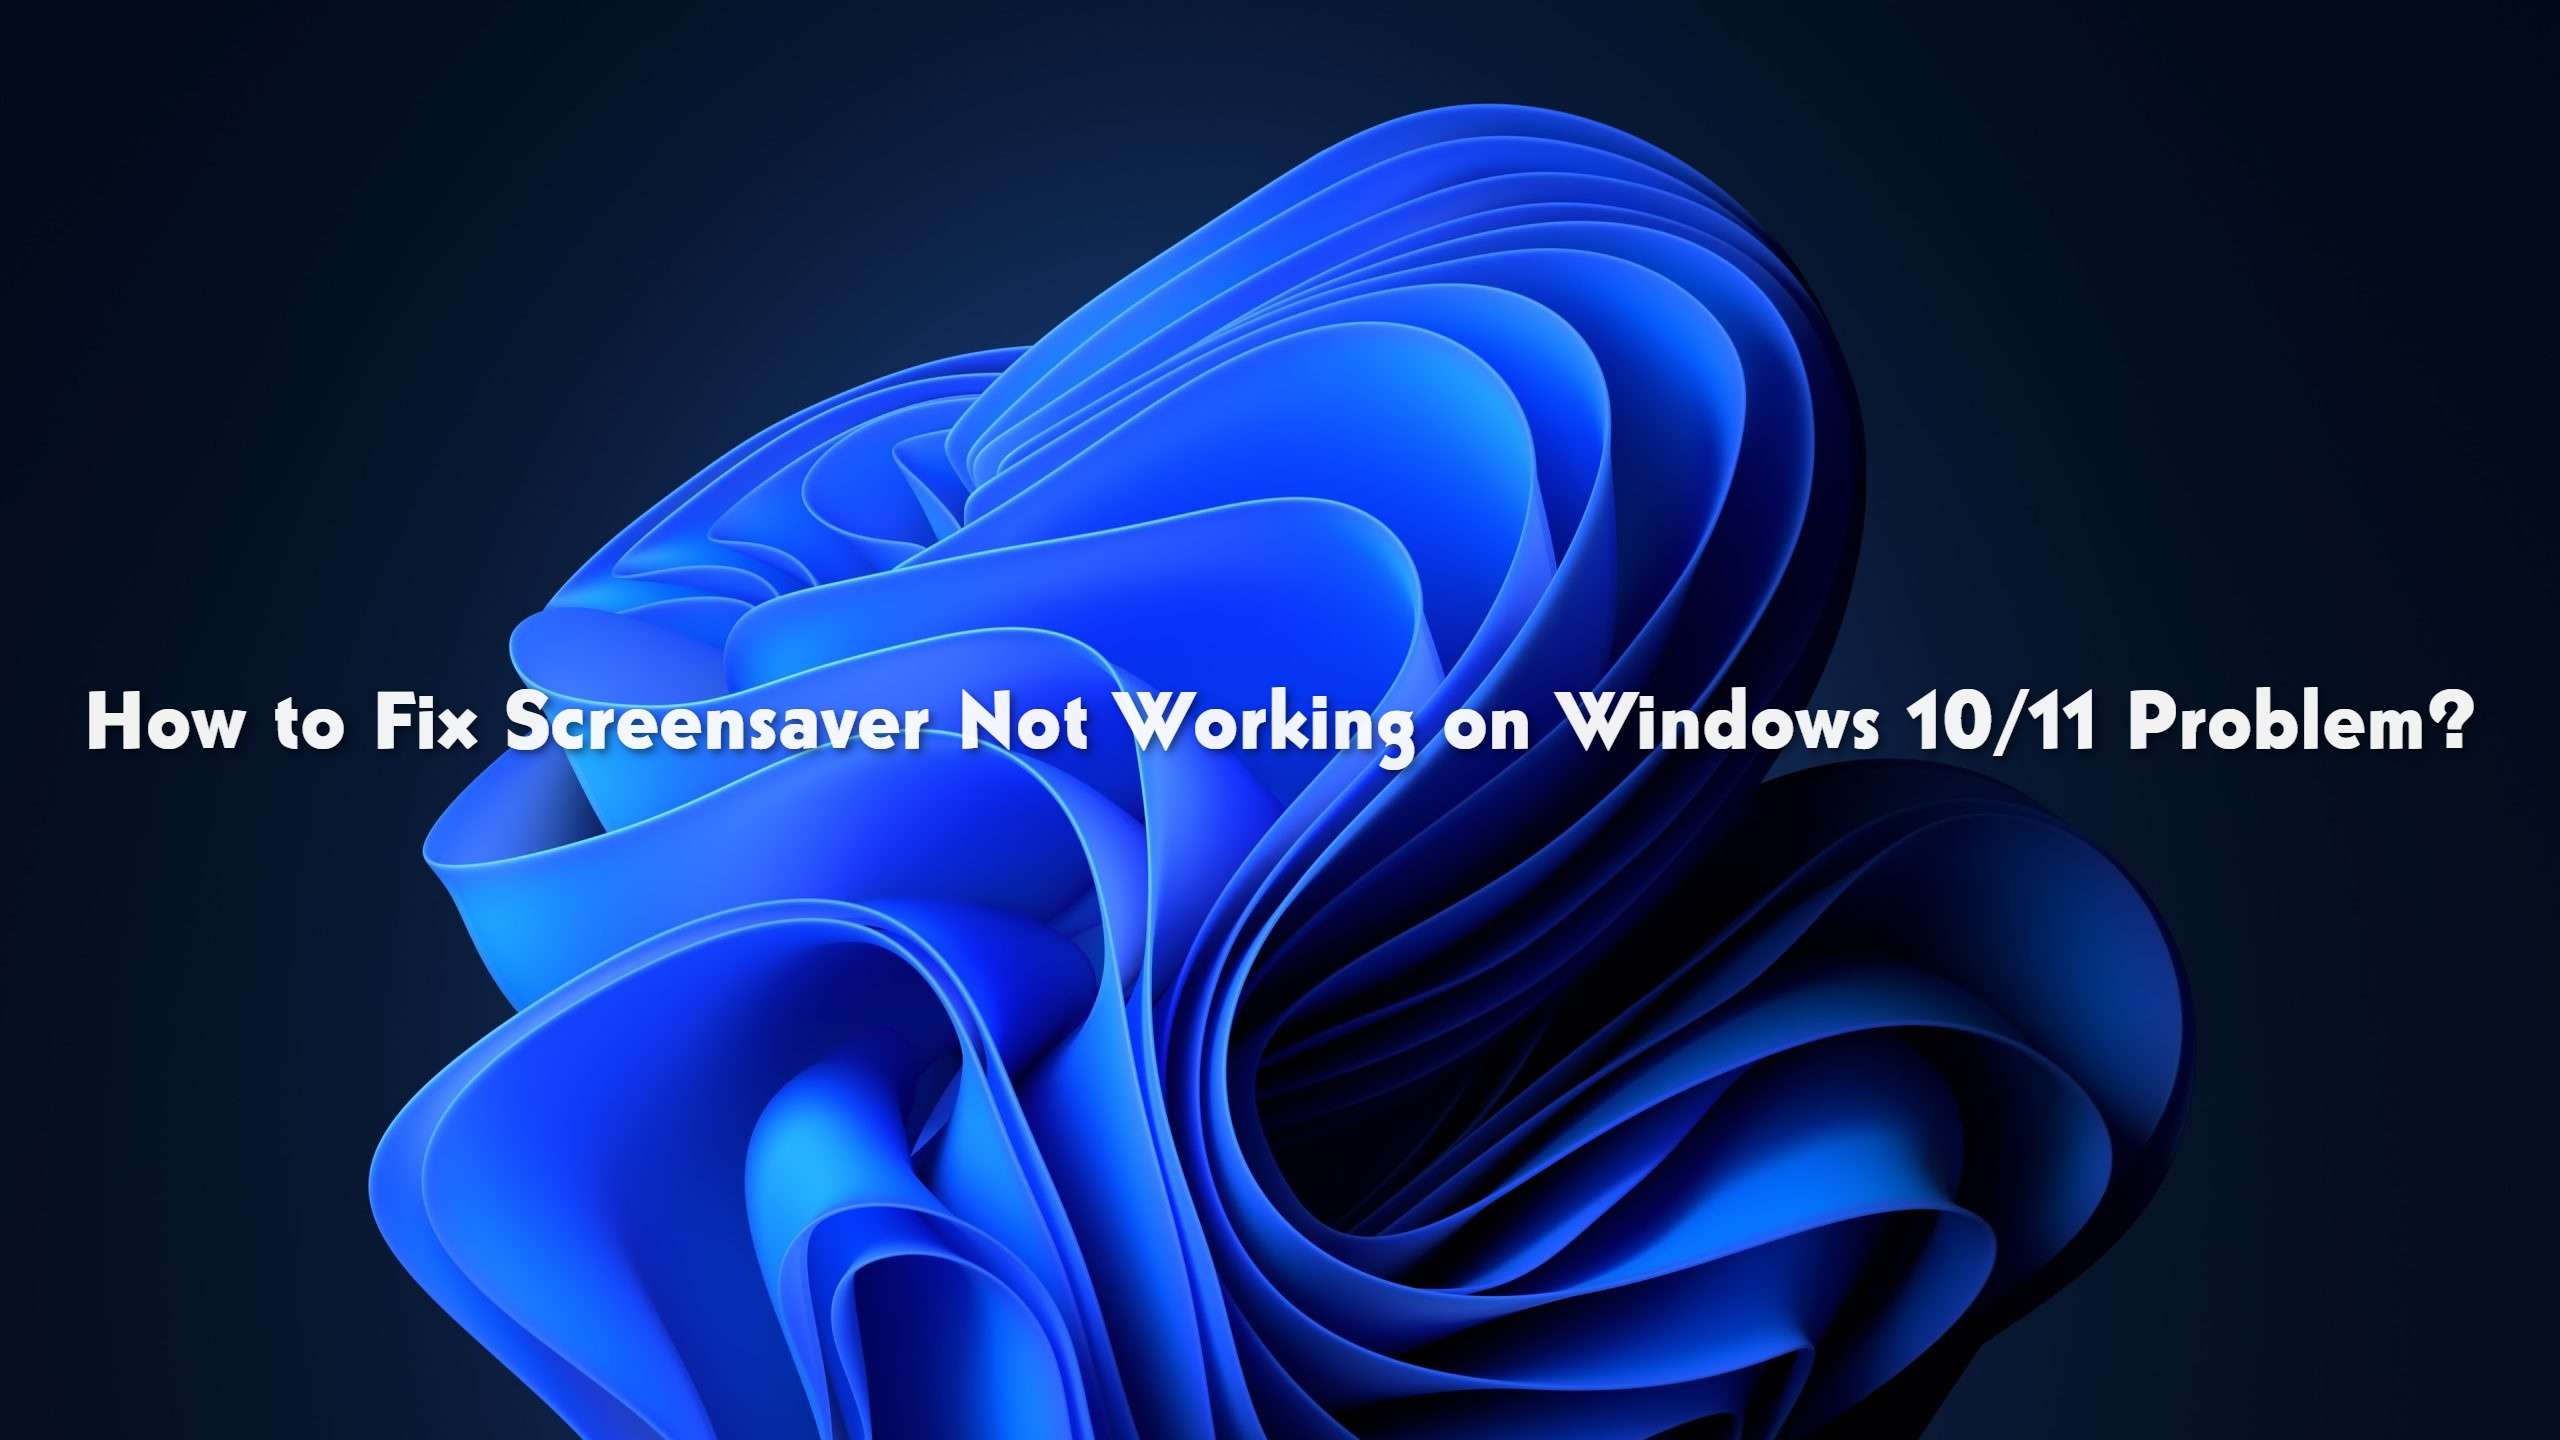 How to Fix the Windows 10/11 Screensaver Not Working Problem?